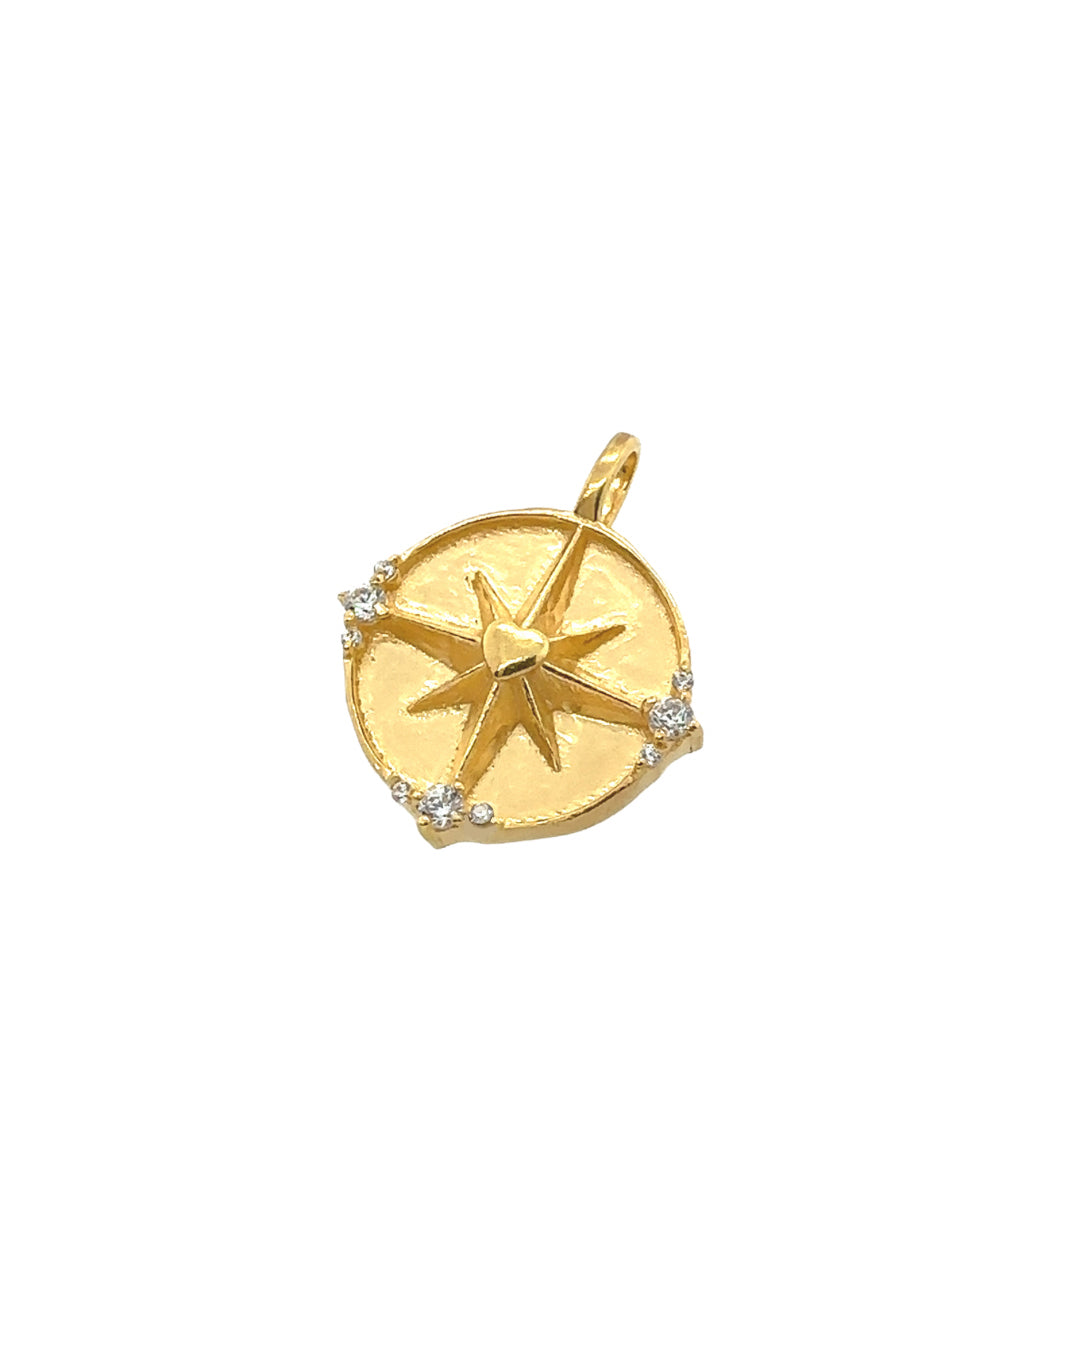 14k gold fill dreamers coin necklace pendant charm